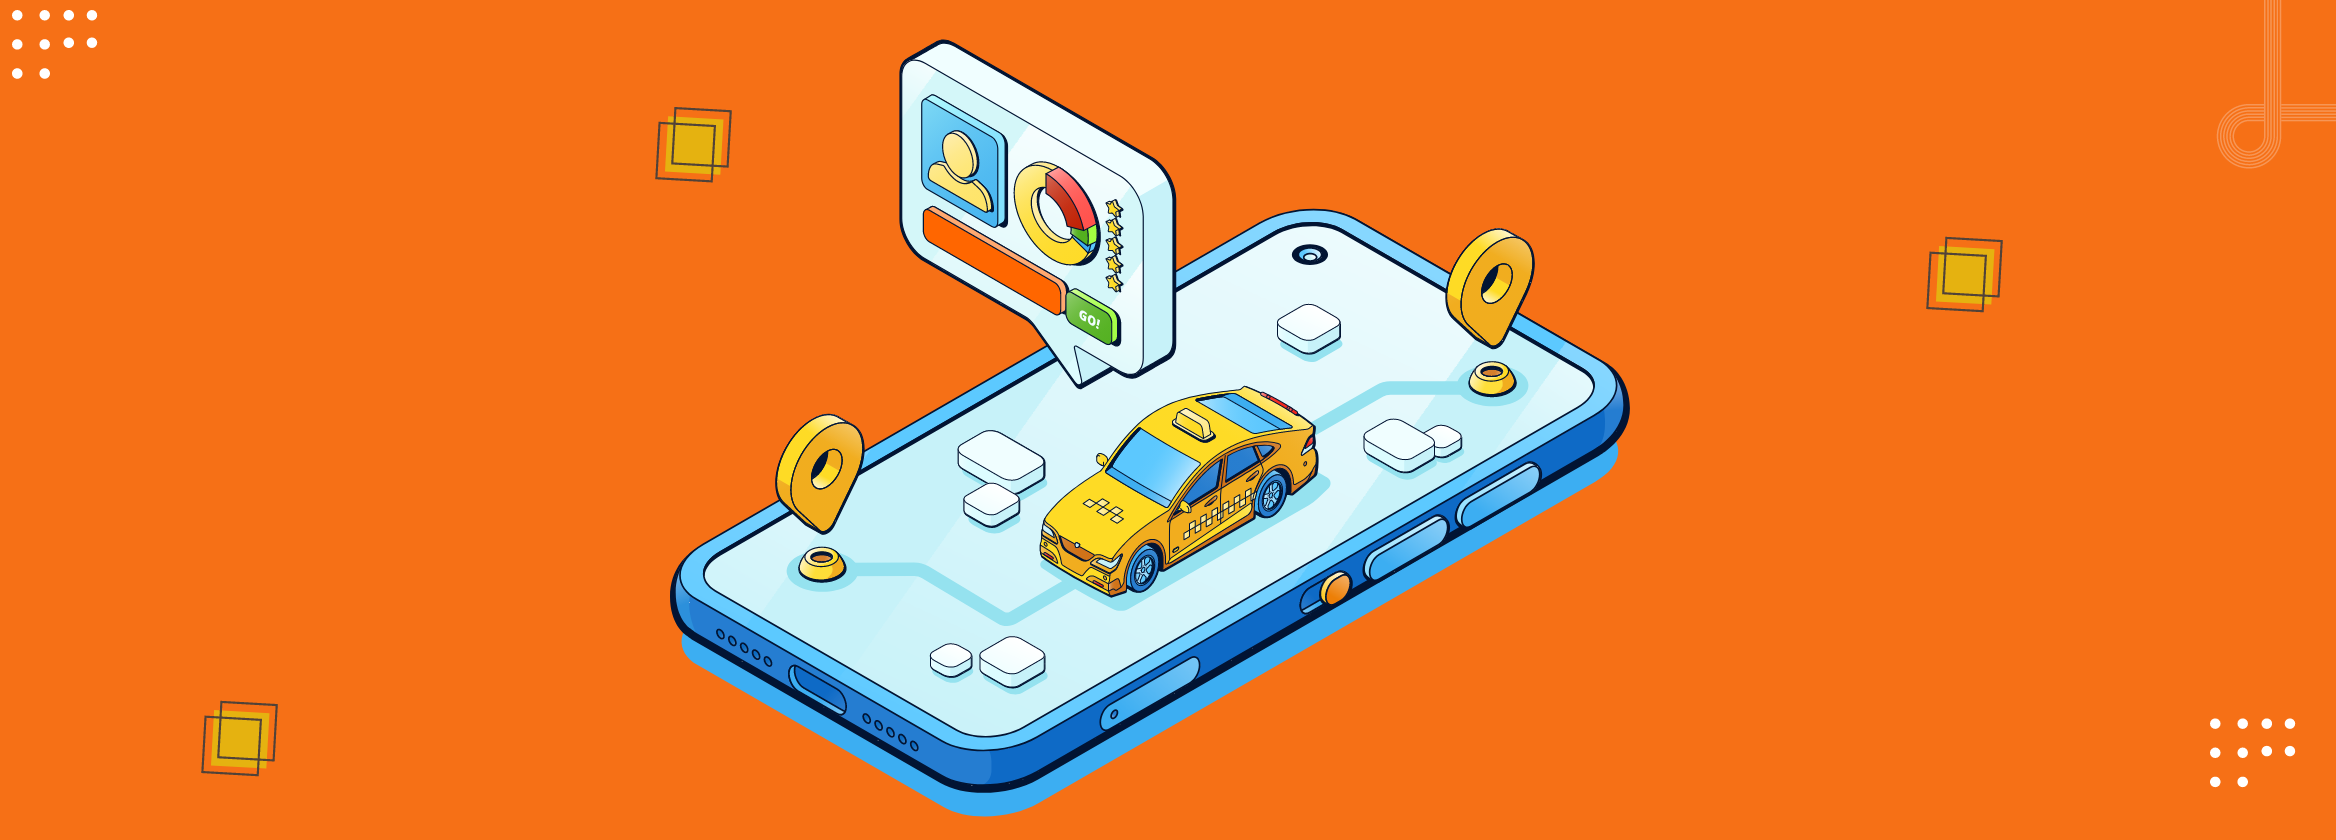 How to Build an On-Demand Ridesharing App- “Start Your Venture Within Days”!